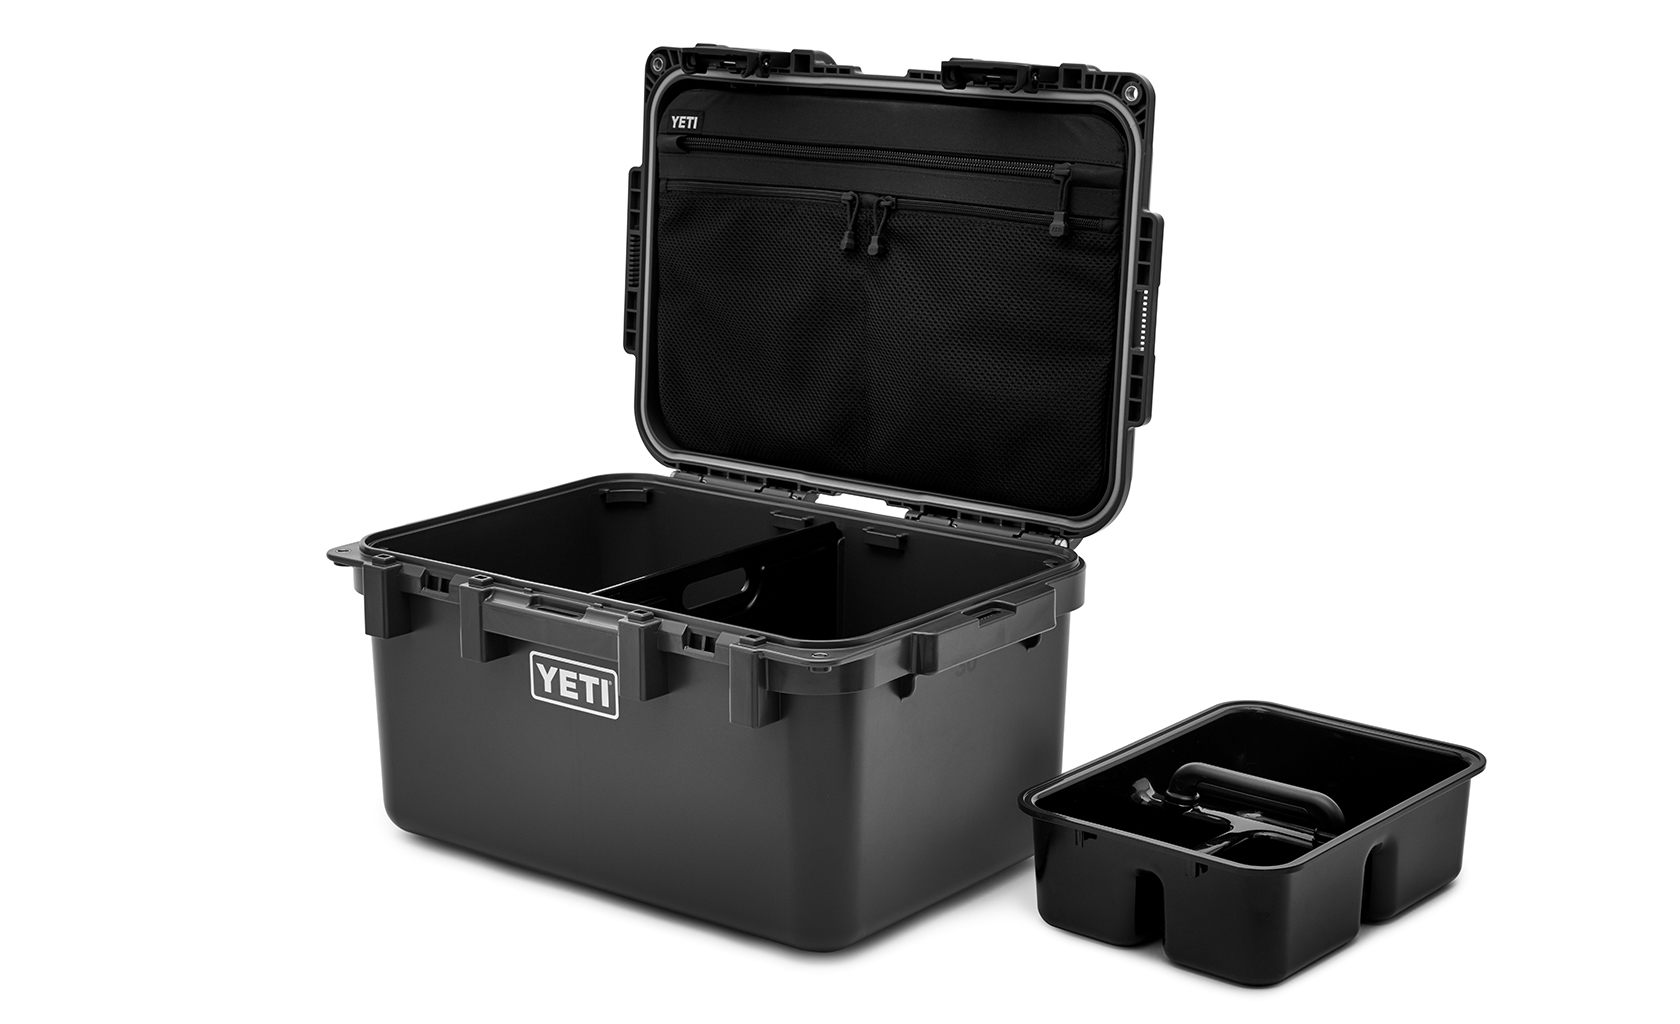  YETI LoadOut 15 GoBox Divided Cargo Case, Camp Green